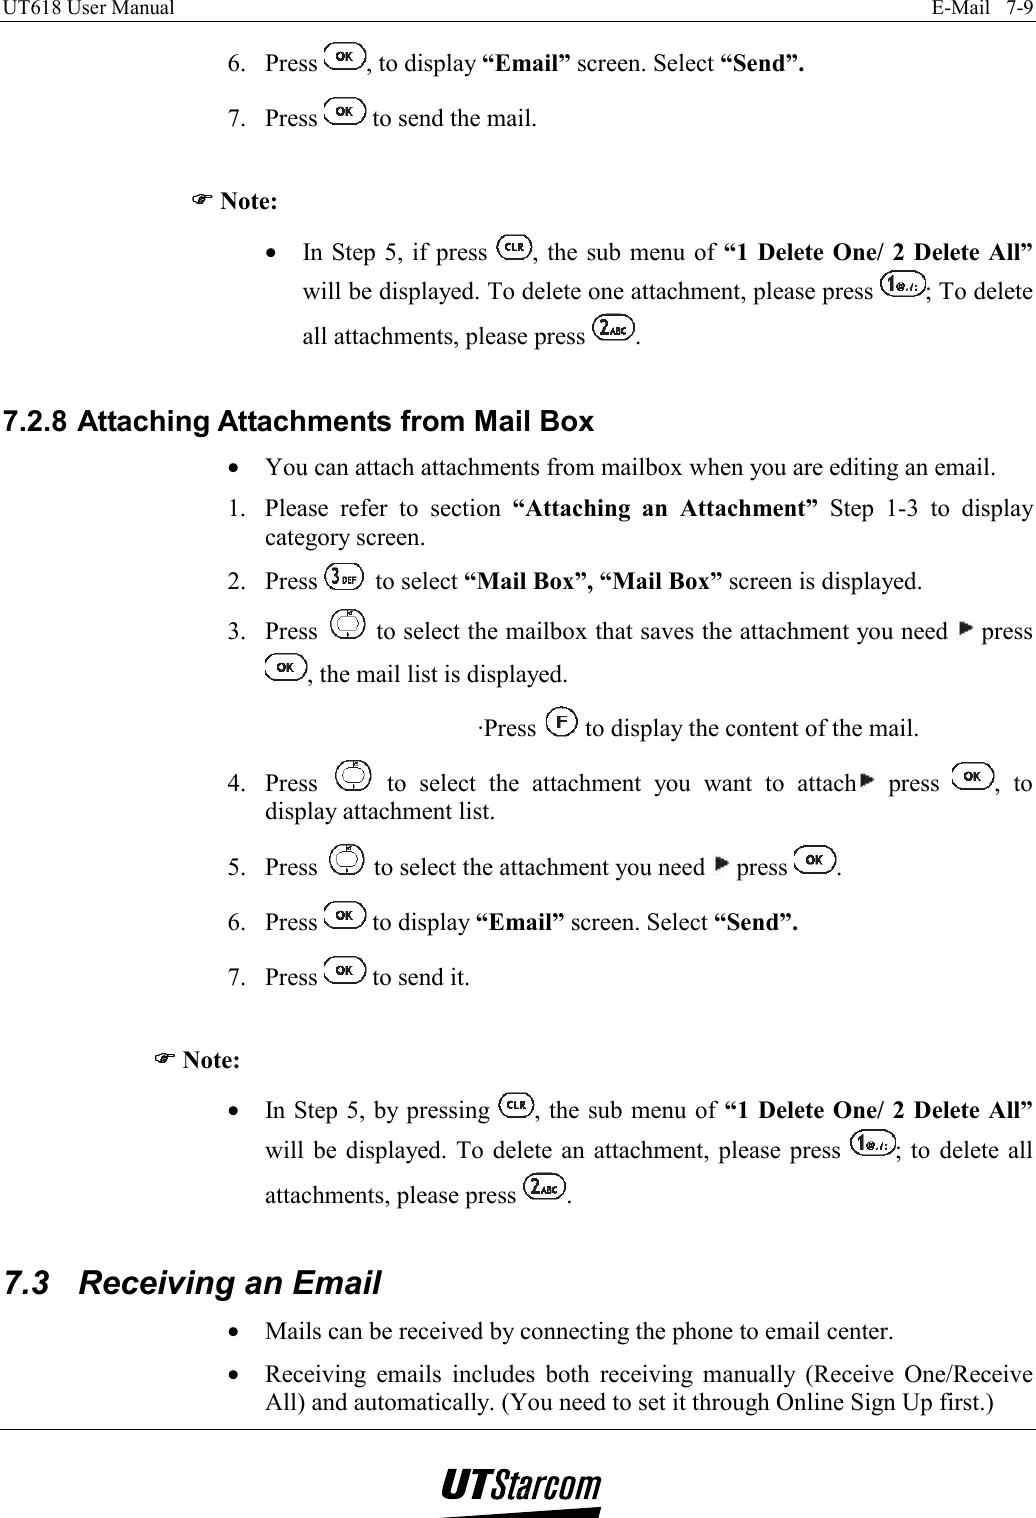 UT618 User Manual    E-Mail   7-9   6. Press  , to display “Email” screen. Select “Send”. 7. Press   to send the mail.  )))) Note: •  In Step 5, if press  , the sub menu of “1 Delete One/ 2 Delete All” will be displayed. To delete one attachment, please press  ; To delete all attachments, please press  .  7.2.8 Attaching Attachments from Mail Box •  You can attach attachments from mailbox when you are editing an email. 1.  Please refer to section “Attaching an Attachment” Step 1-3 to display category screen. 2. Press   to select “Mail Box”, “Mail Box” screen is displayed. 3. Press   to select the mailbox that saves the attachment you need   press , the mail list is displayed. ·Press   to display the content of the mail. 4. Press   to select the attachment you want to attach  press  , to display attachment list. 5. Press   to select the attachment you need   press  . 6. Press   to display “Email” screen. Select “Send”. 7. Press   to send it.  )))) Note: •  In Step 5, by pressing  , the sub menu of “1 Delete One/ 2 Delete All” will be displayed. To delete an attachment, please press  ; to delete all attachments, please press  .  7.3  Receiving an Email •  Mails can be received by connecting the phone to email center. •  Receiving emails includes both receiving manually (Receive One/Receive All) and automatically. (You need to set it through Online Sign Up first.) 